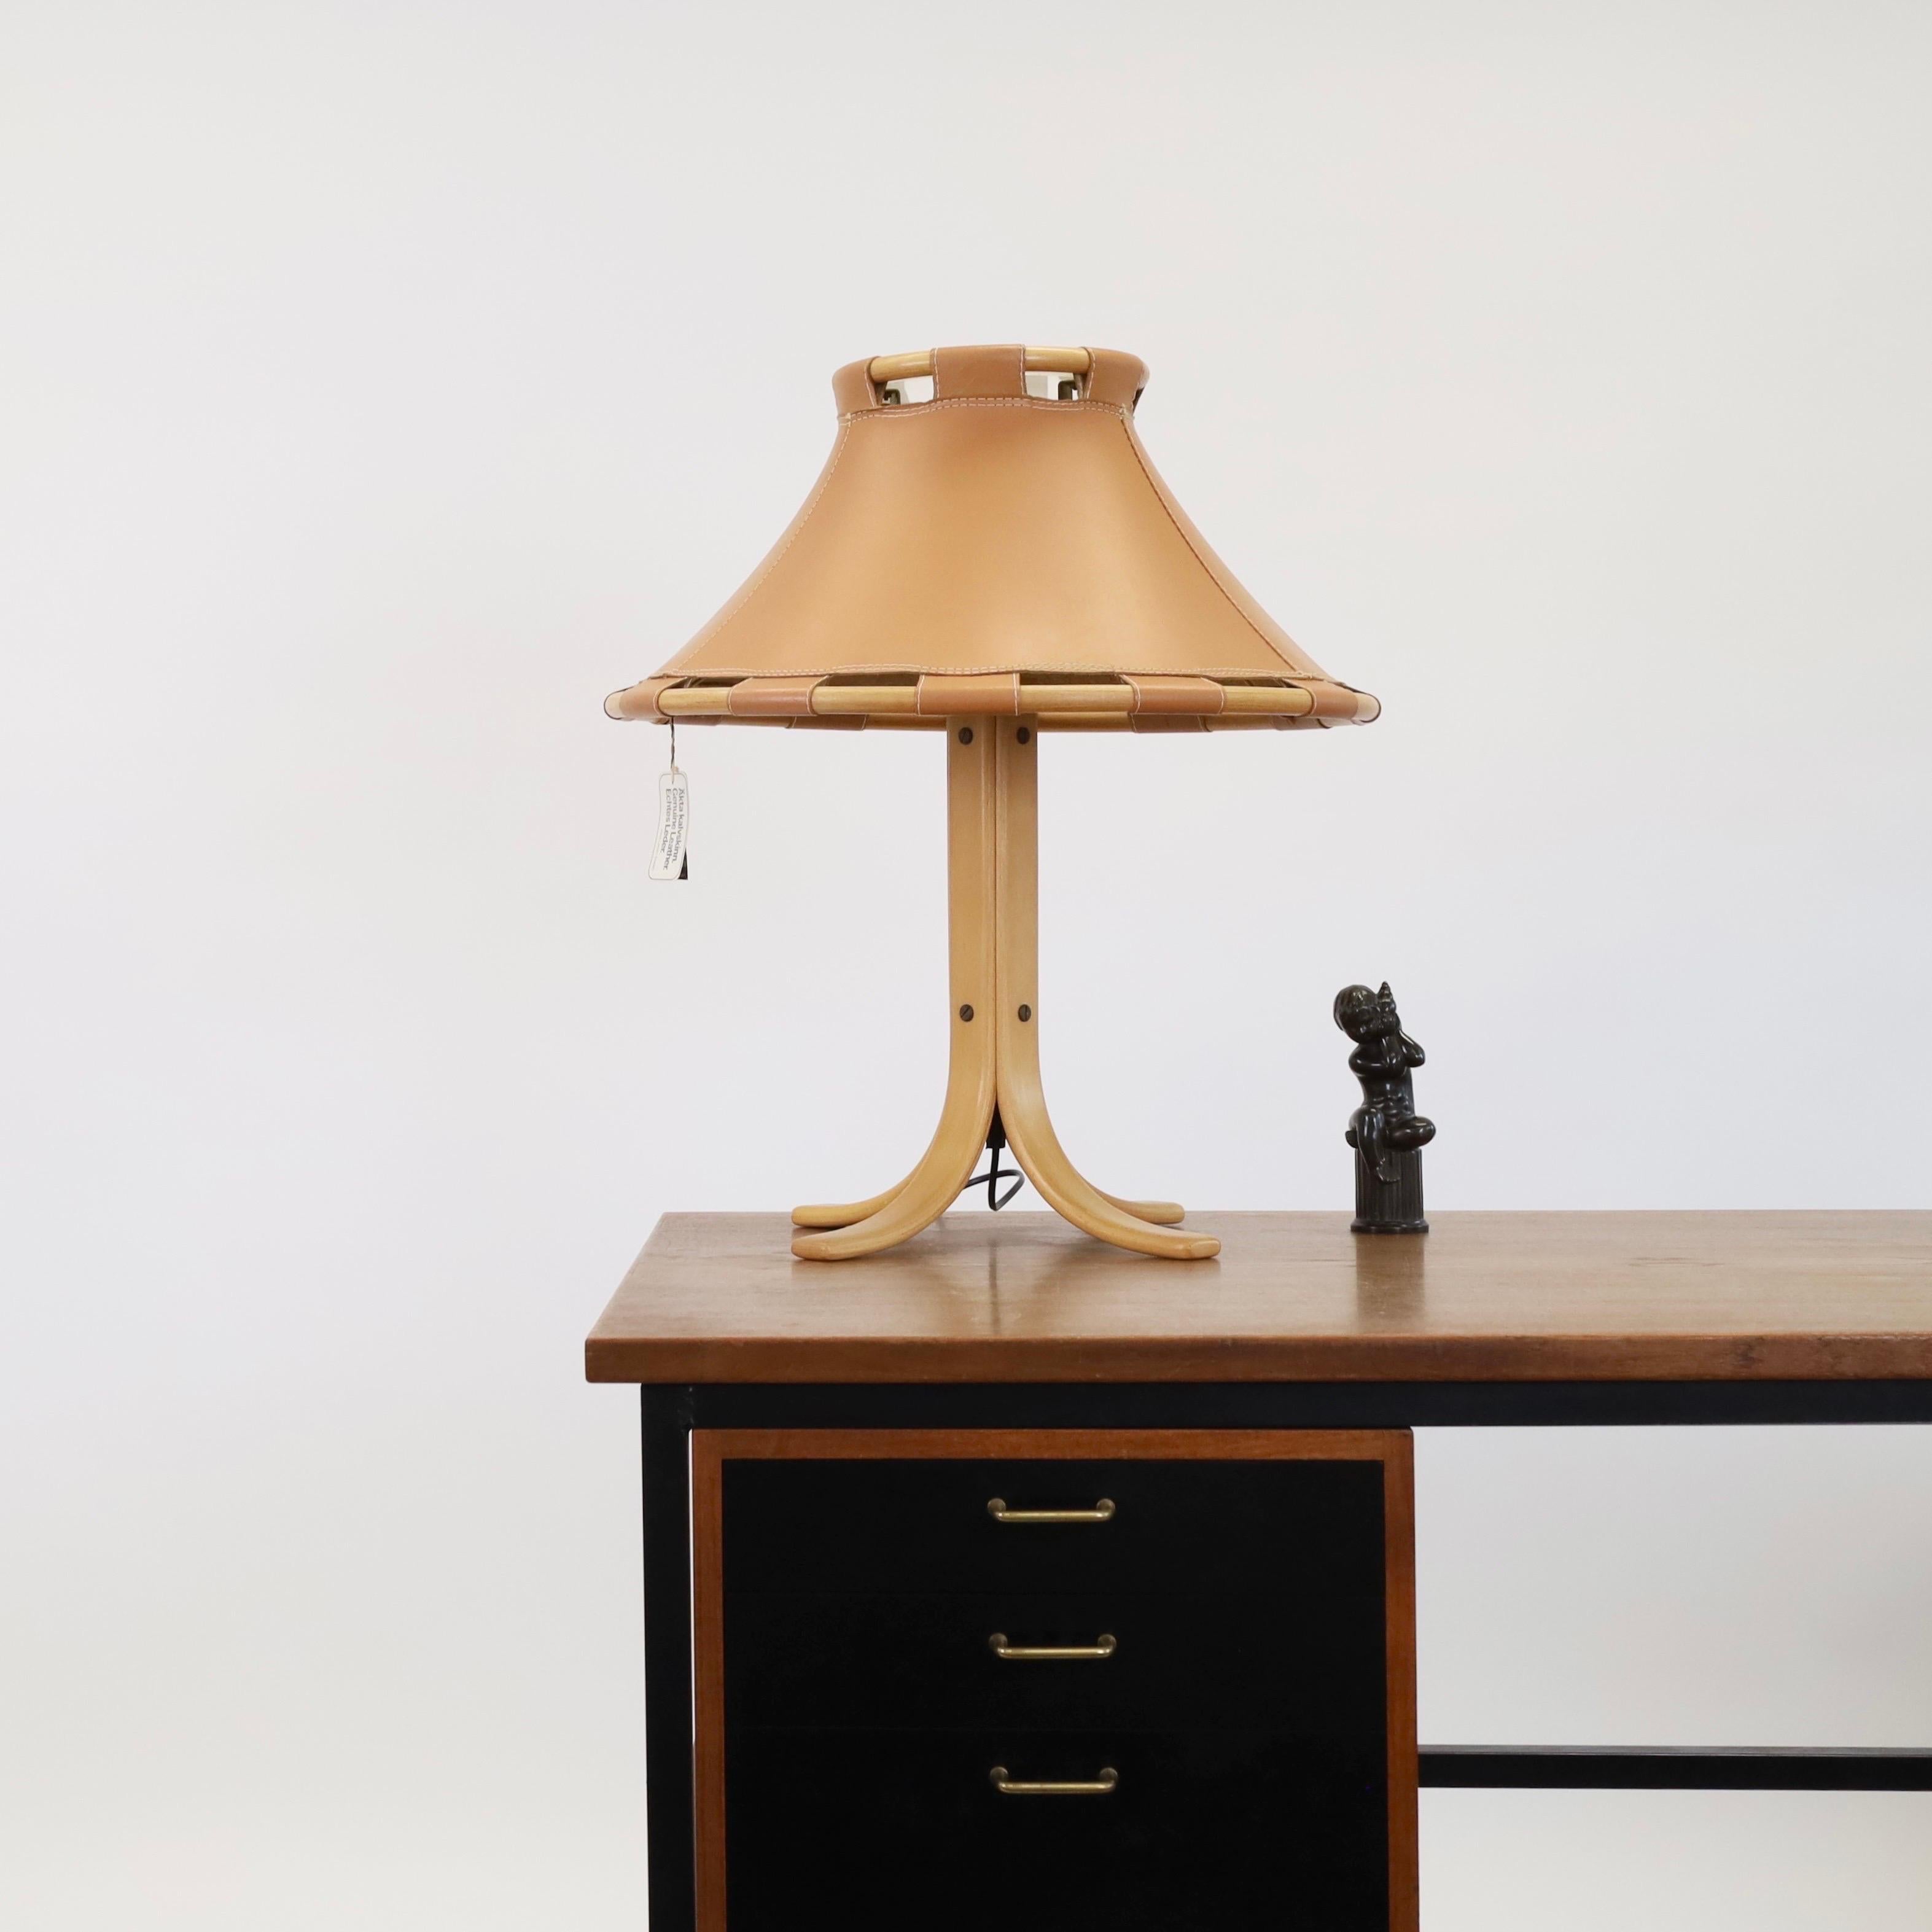 A substantial beech wood and leather desk lamp by Anna Ehrner for Ateljé Lyktan. A Nordic vibe to any beautiful space.   

* A bent beech wood desk lamp on four legs with a large leather shade on a bamboo frame.
* Designer: Anna Erhner 
* Model: